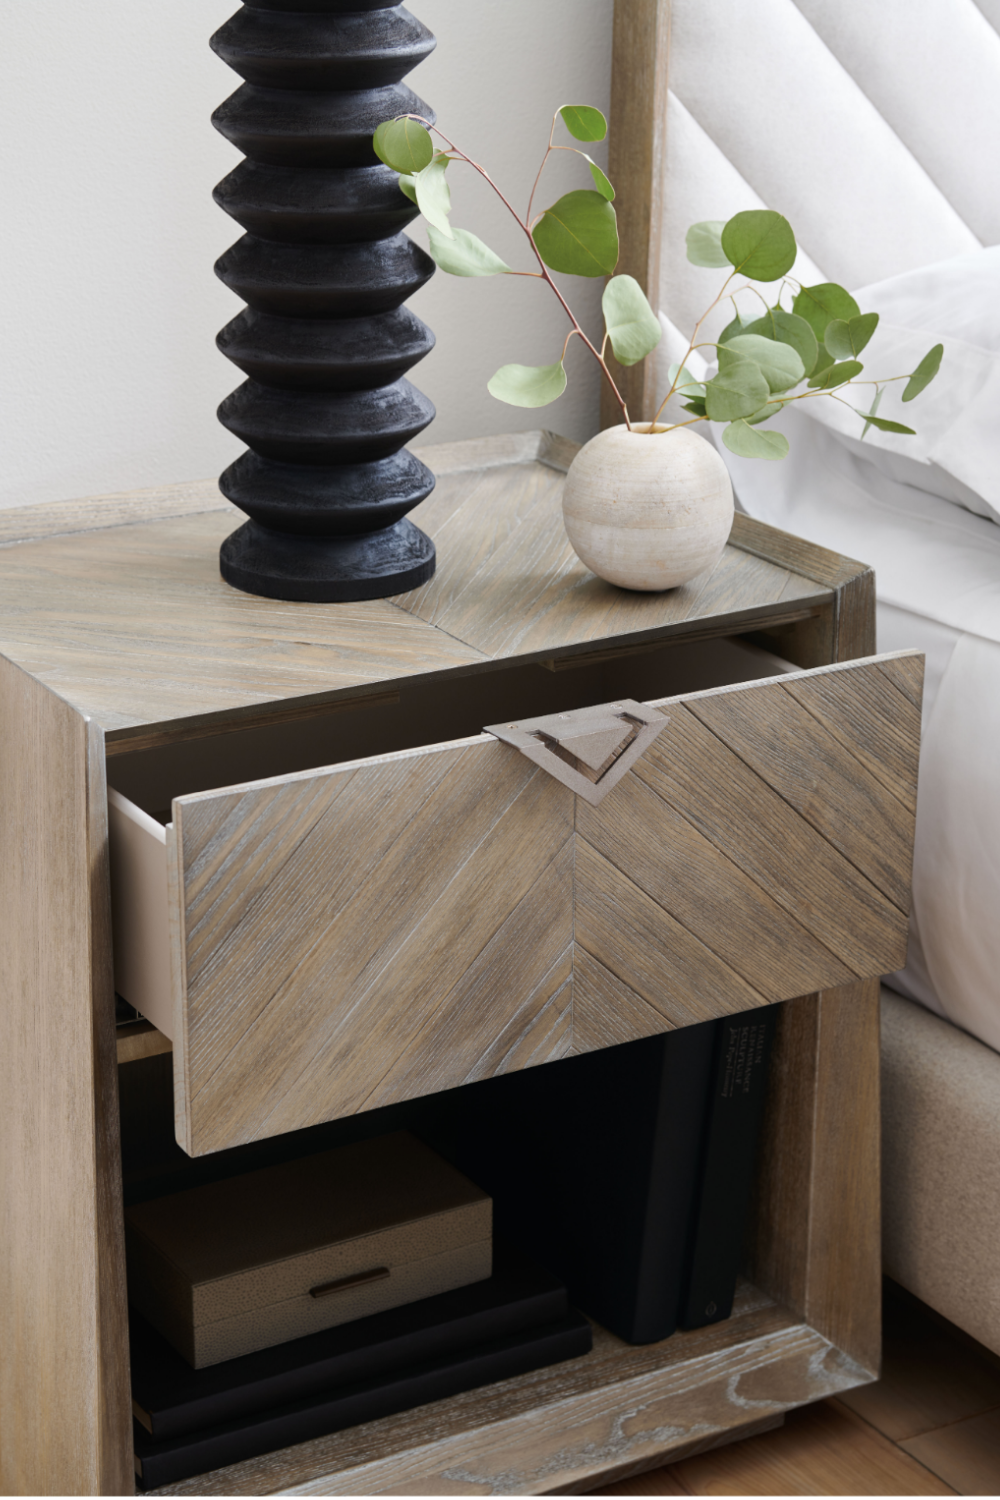 Ash Driftwood Rustic Nightstand | Caracole Earthly Delight | Oroa.com